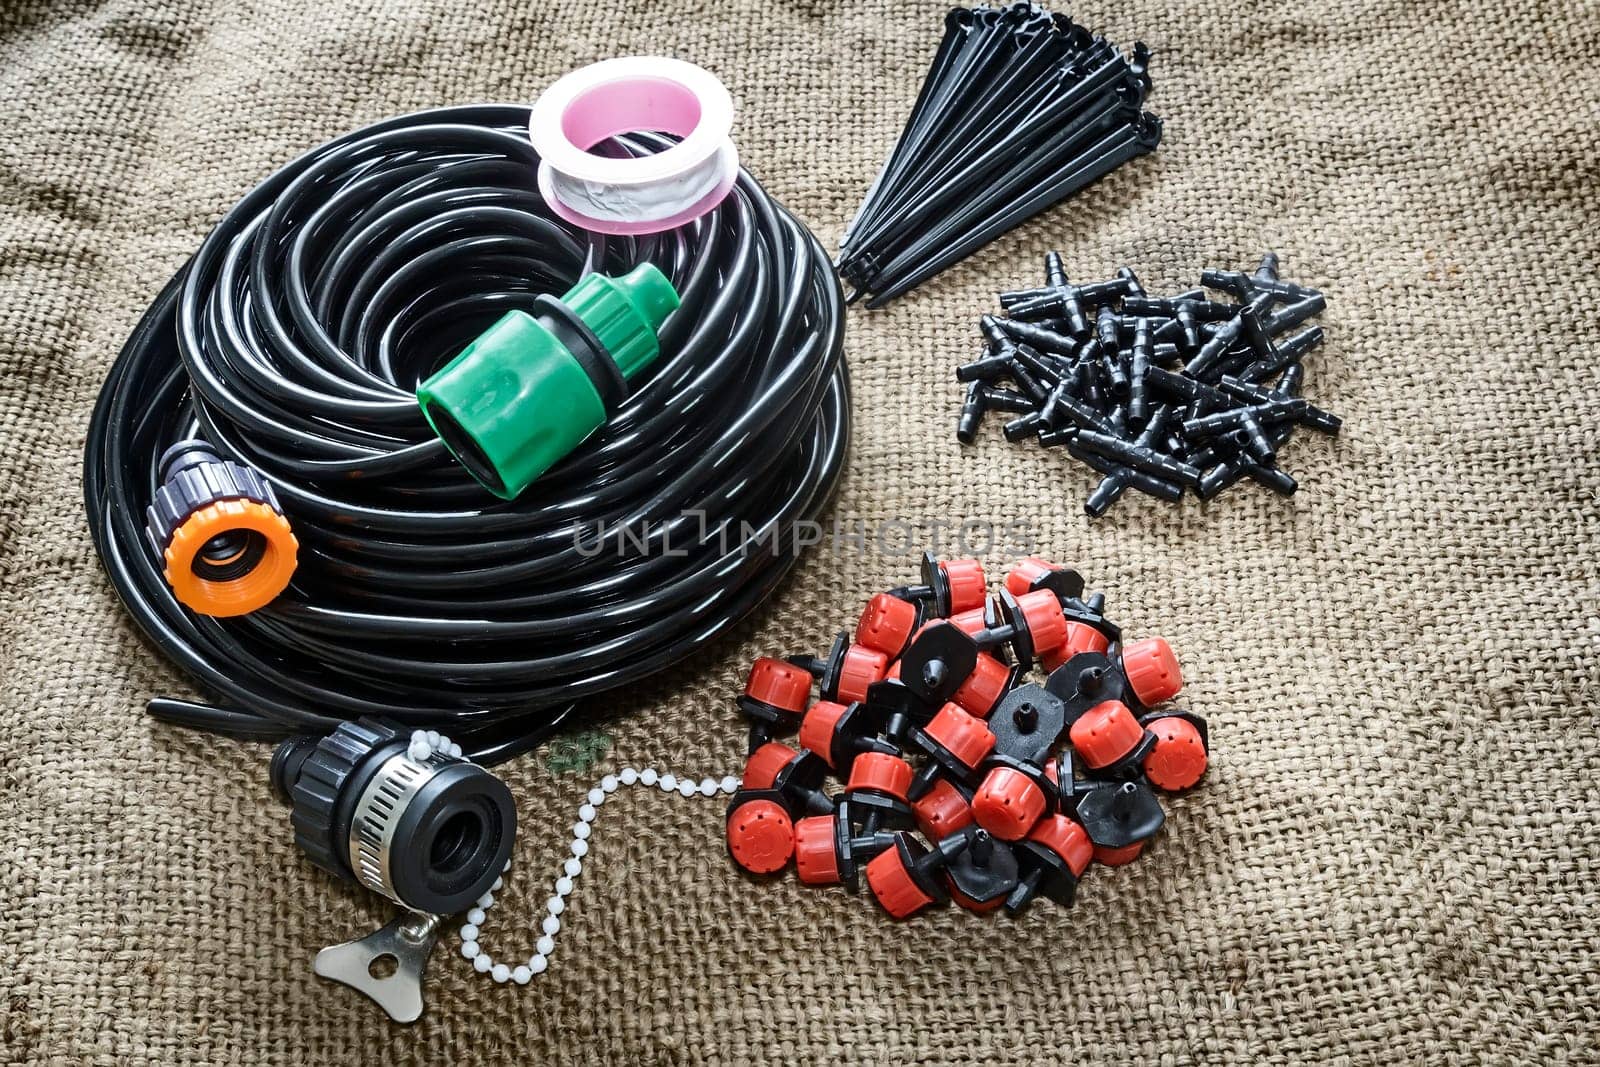 A set of tools for drip irrigation of plants and garden: hose, sprinklers, joints, hose holders.